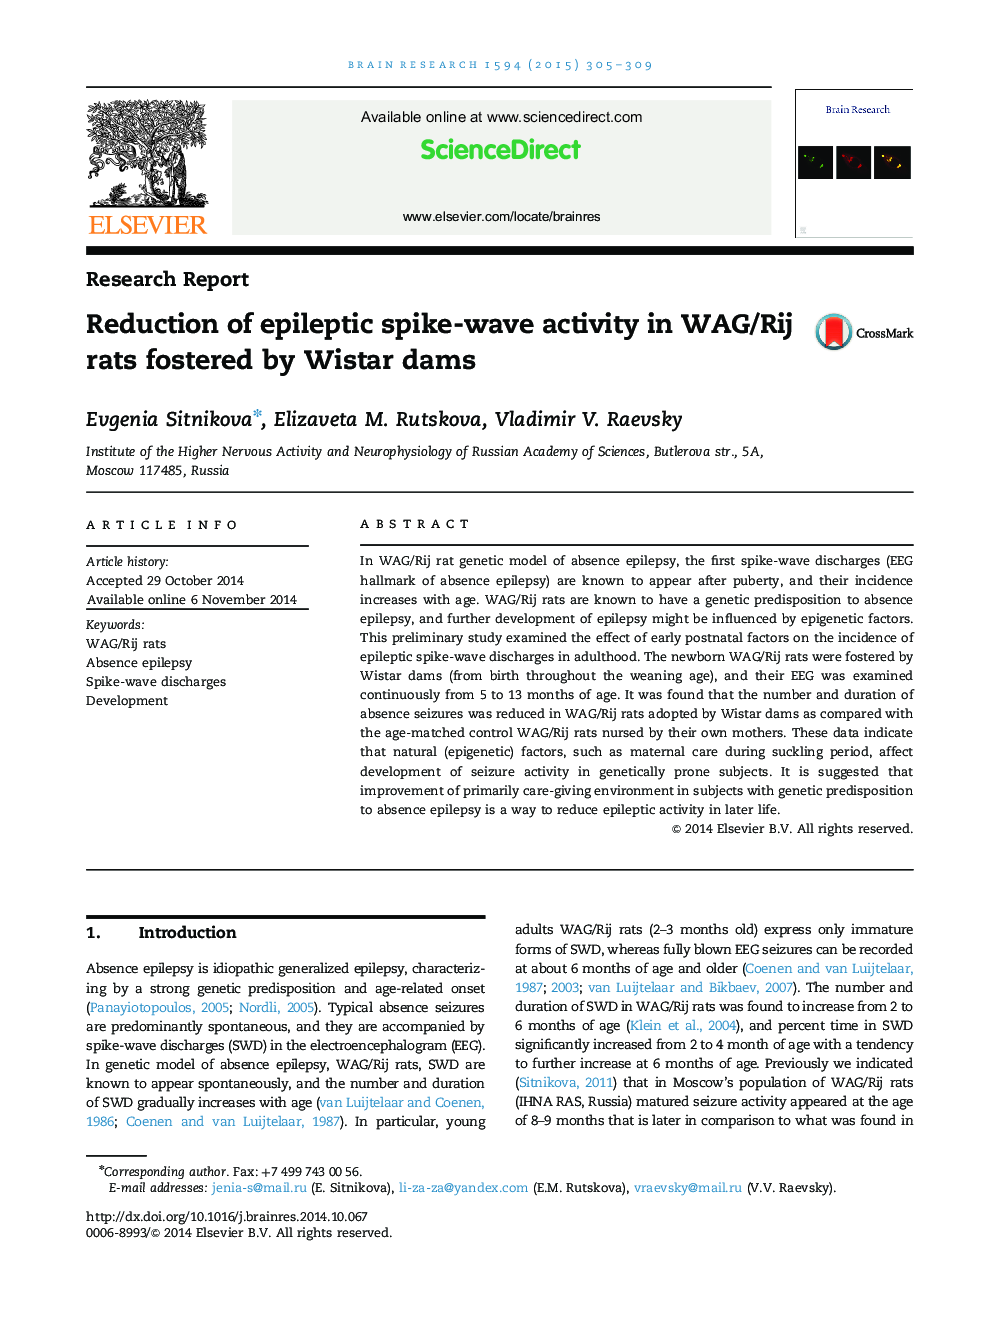 Reduction of epileptic spike-wave activity in WAG/Rij rats fostered by Wistar dams